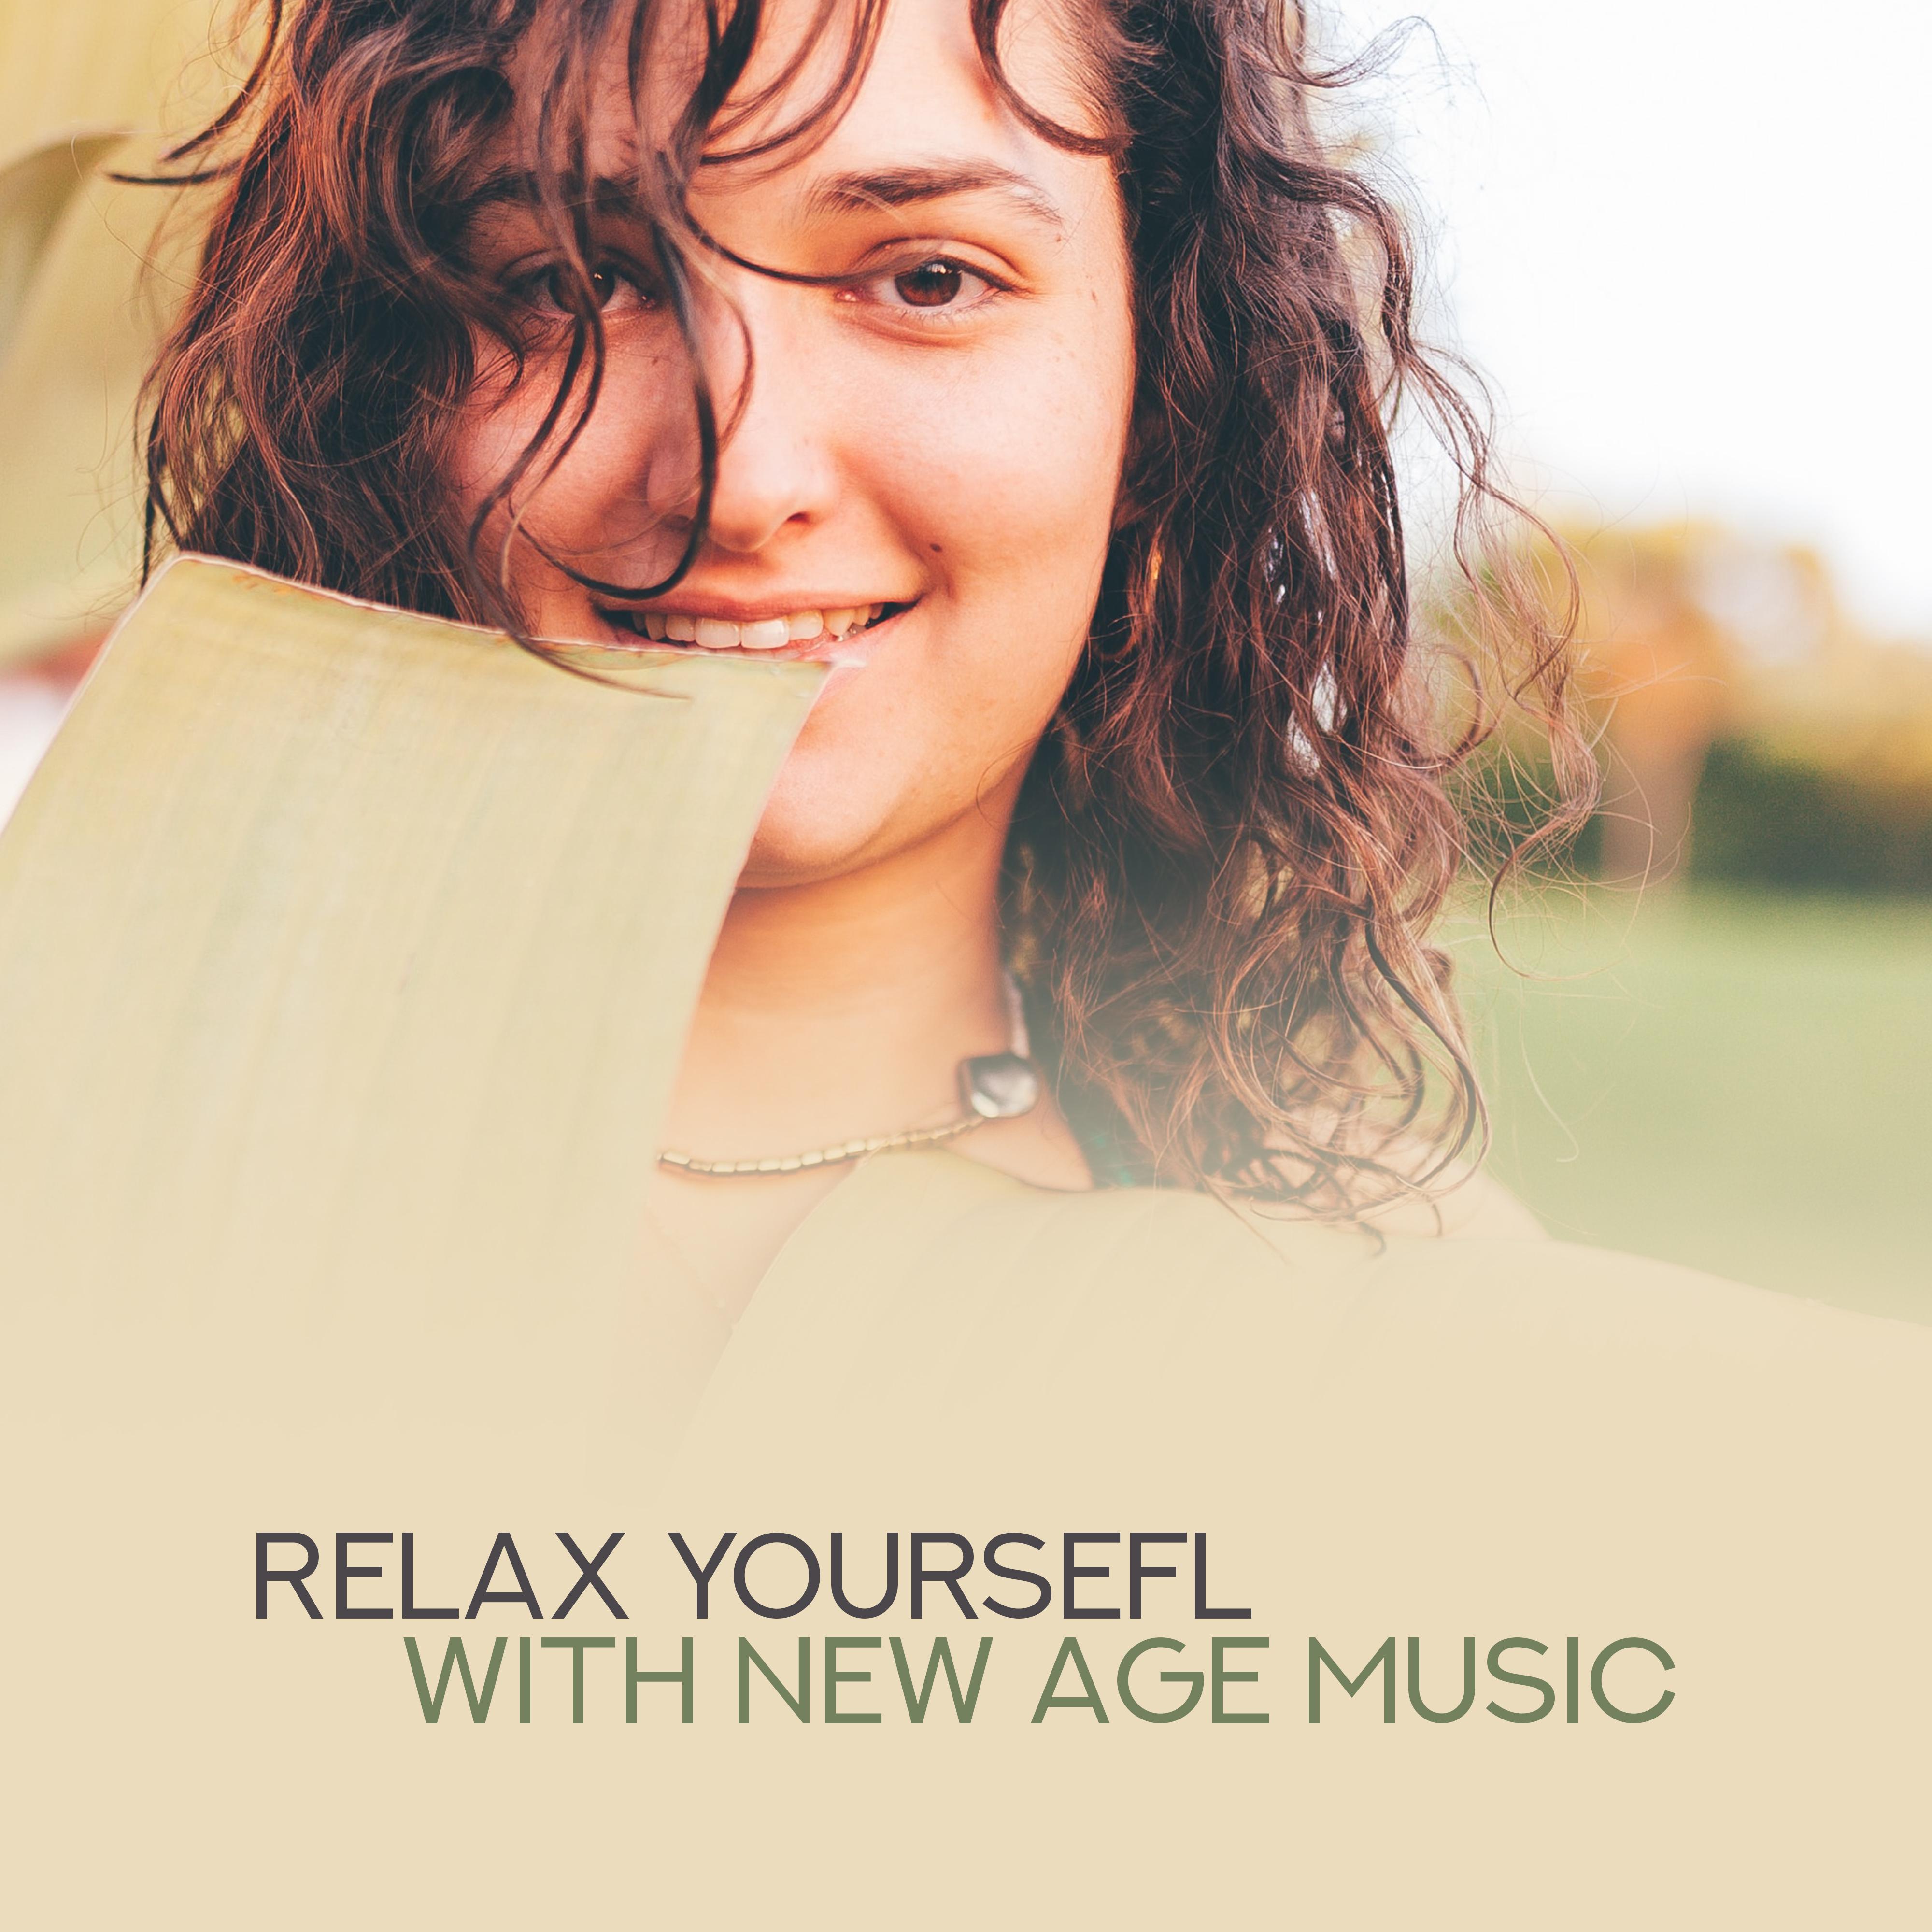 Relax Yoursefl with New Age Music: 2019 Compilation of Relaxing Ambient Songs, Feel Better, Fight with Bad Emotions, Calm Down, Rest After Tough Day, Increase Vital Energy